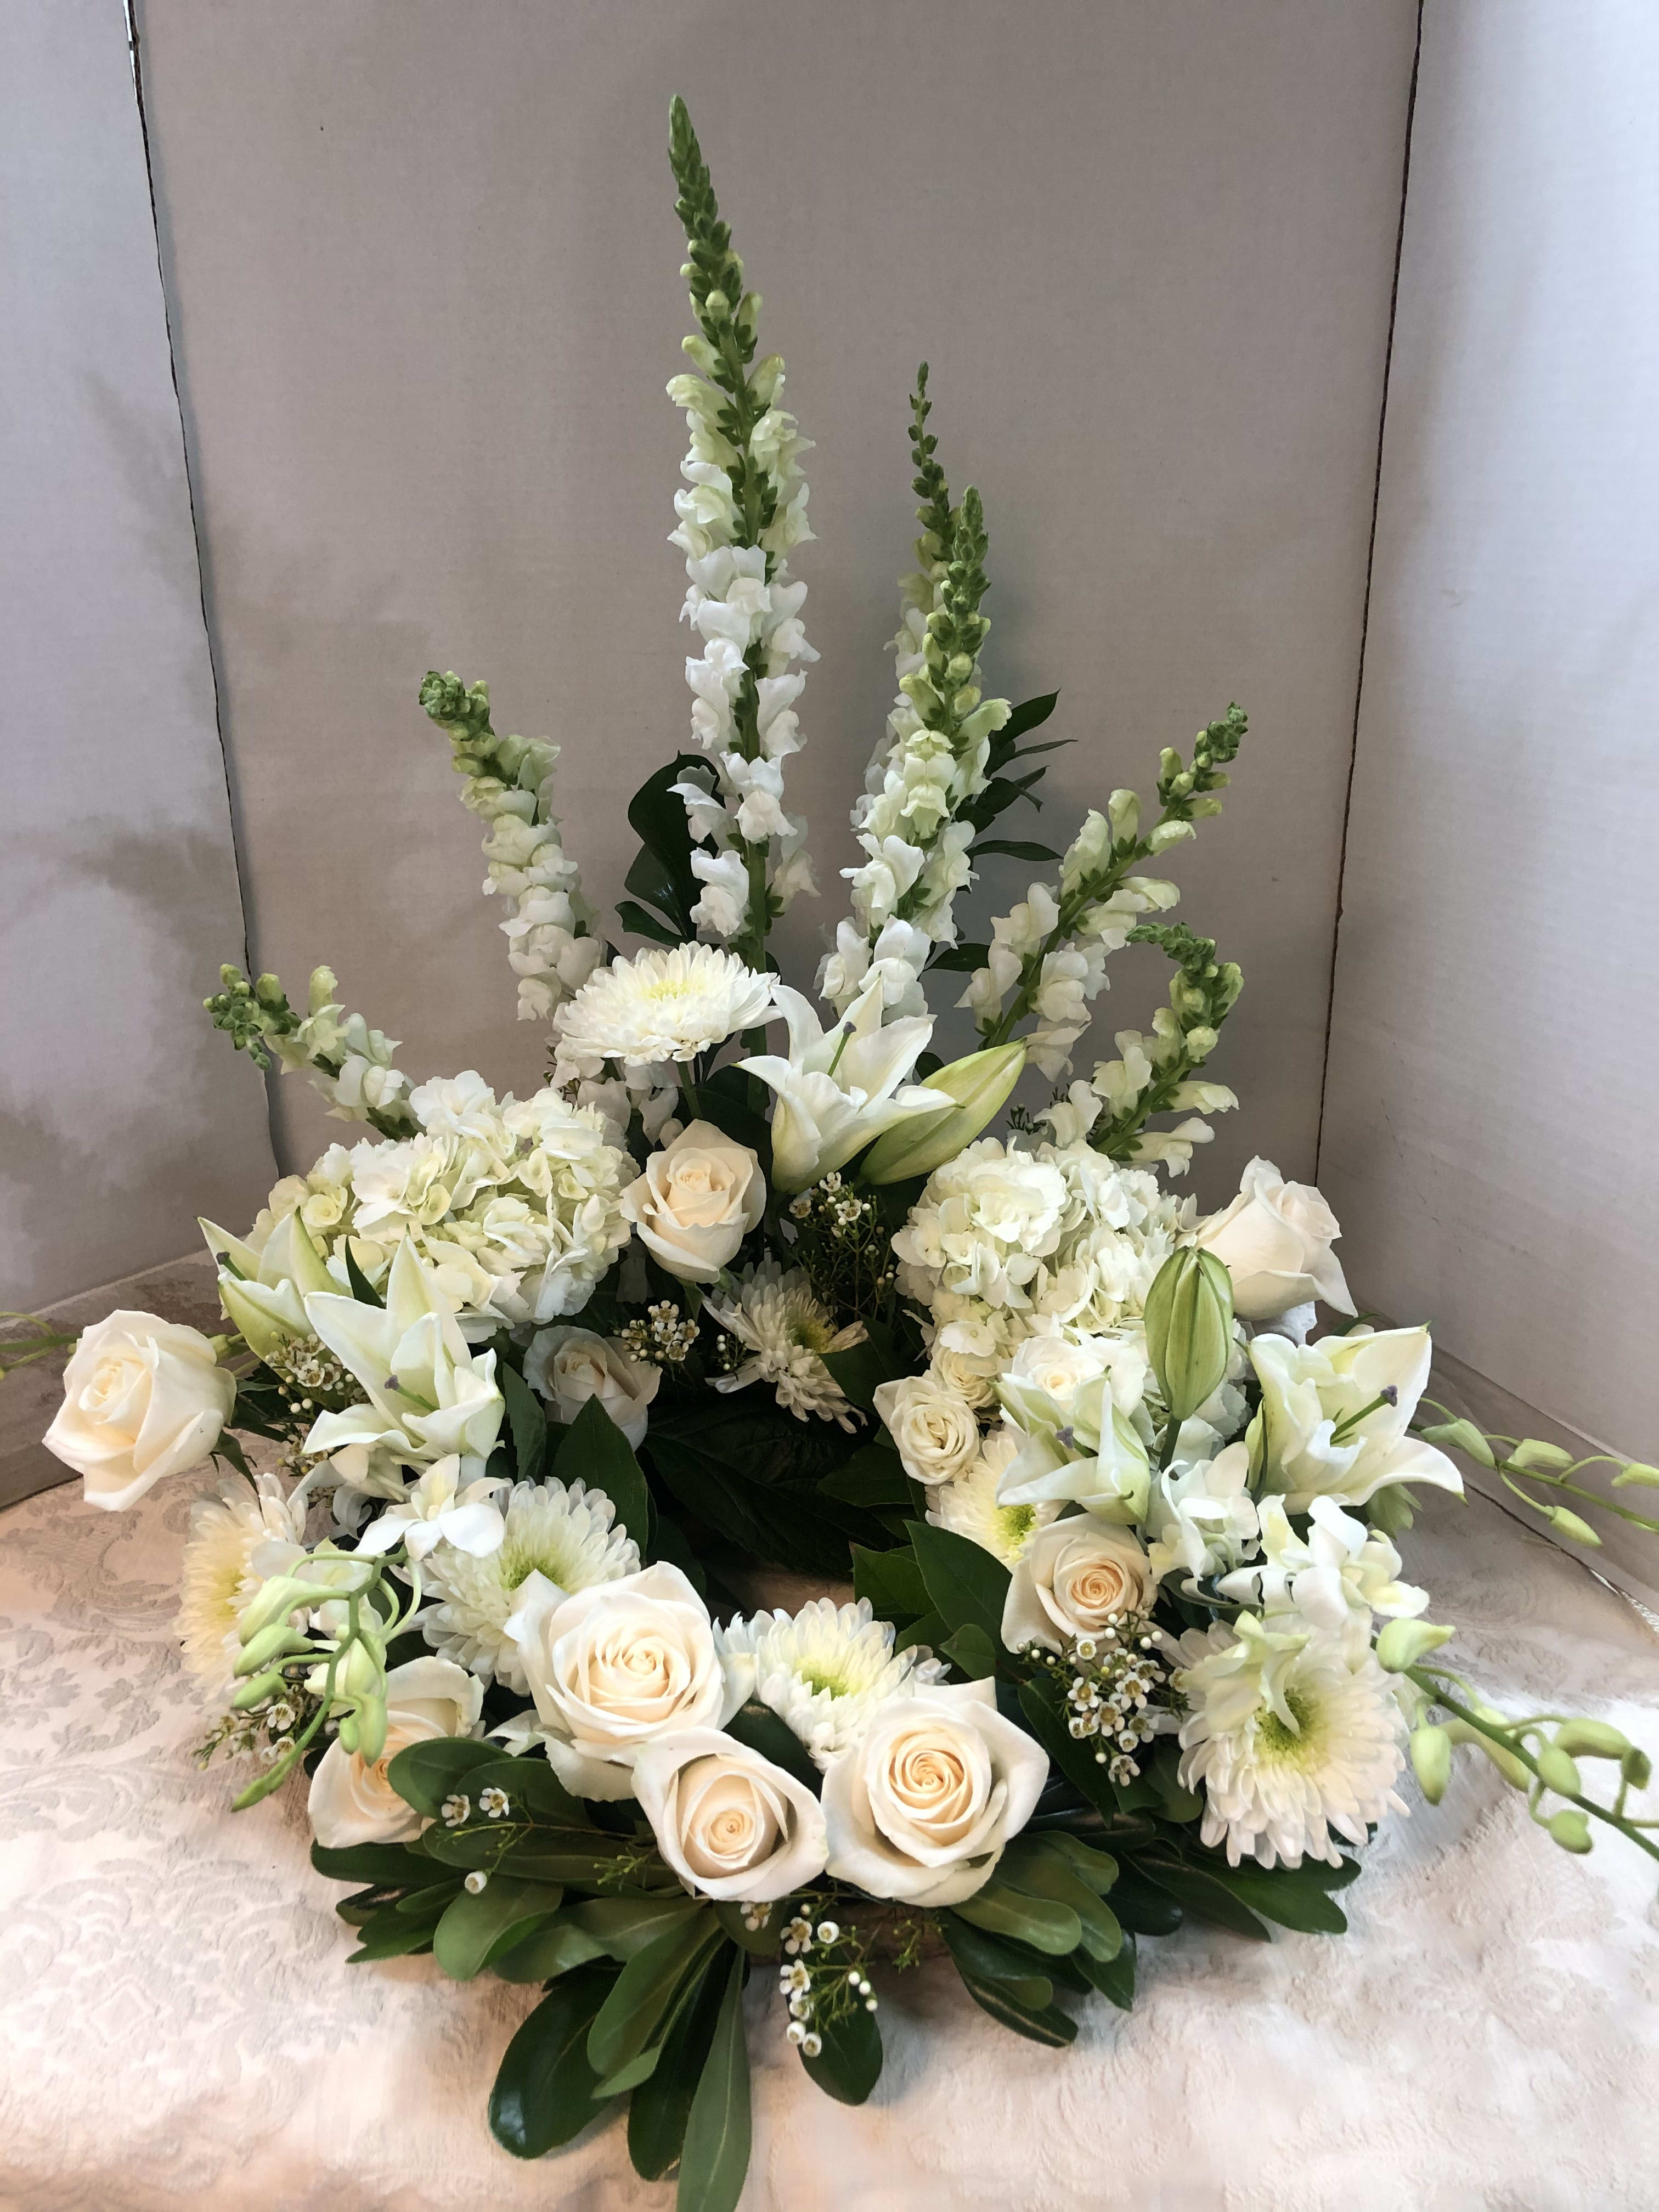 Tribute Centerpiece - Roses, Snap Dragons, Cremons, Lilies, Fancy Greens